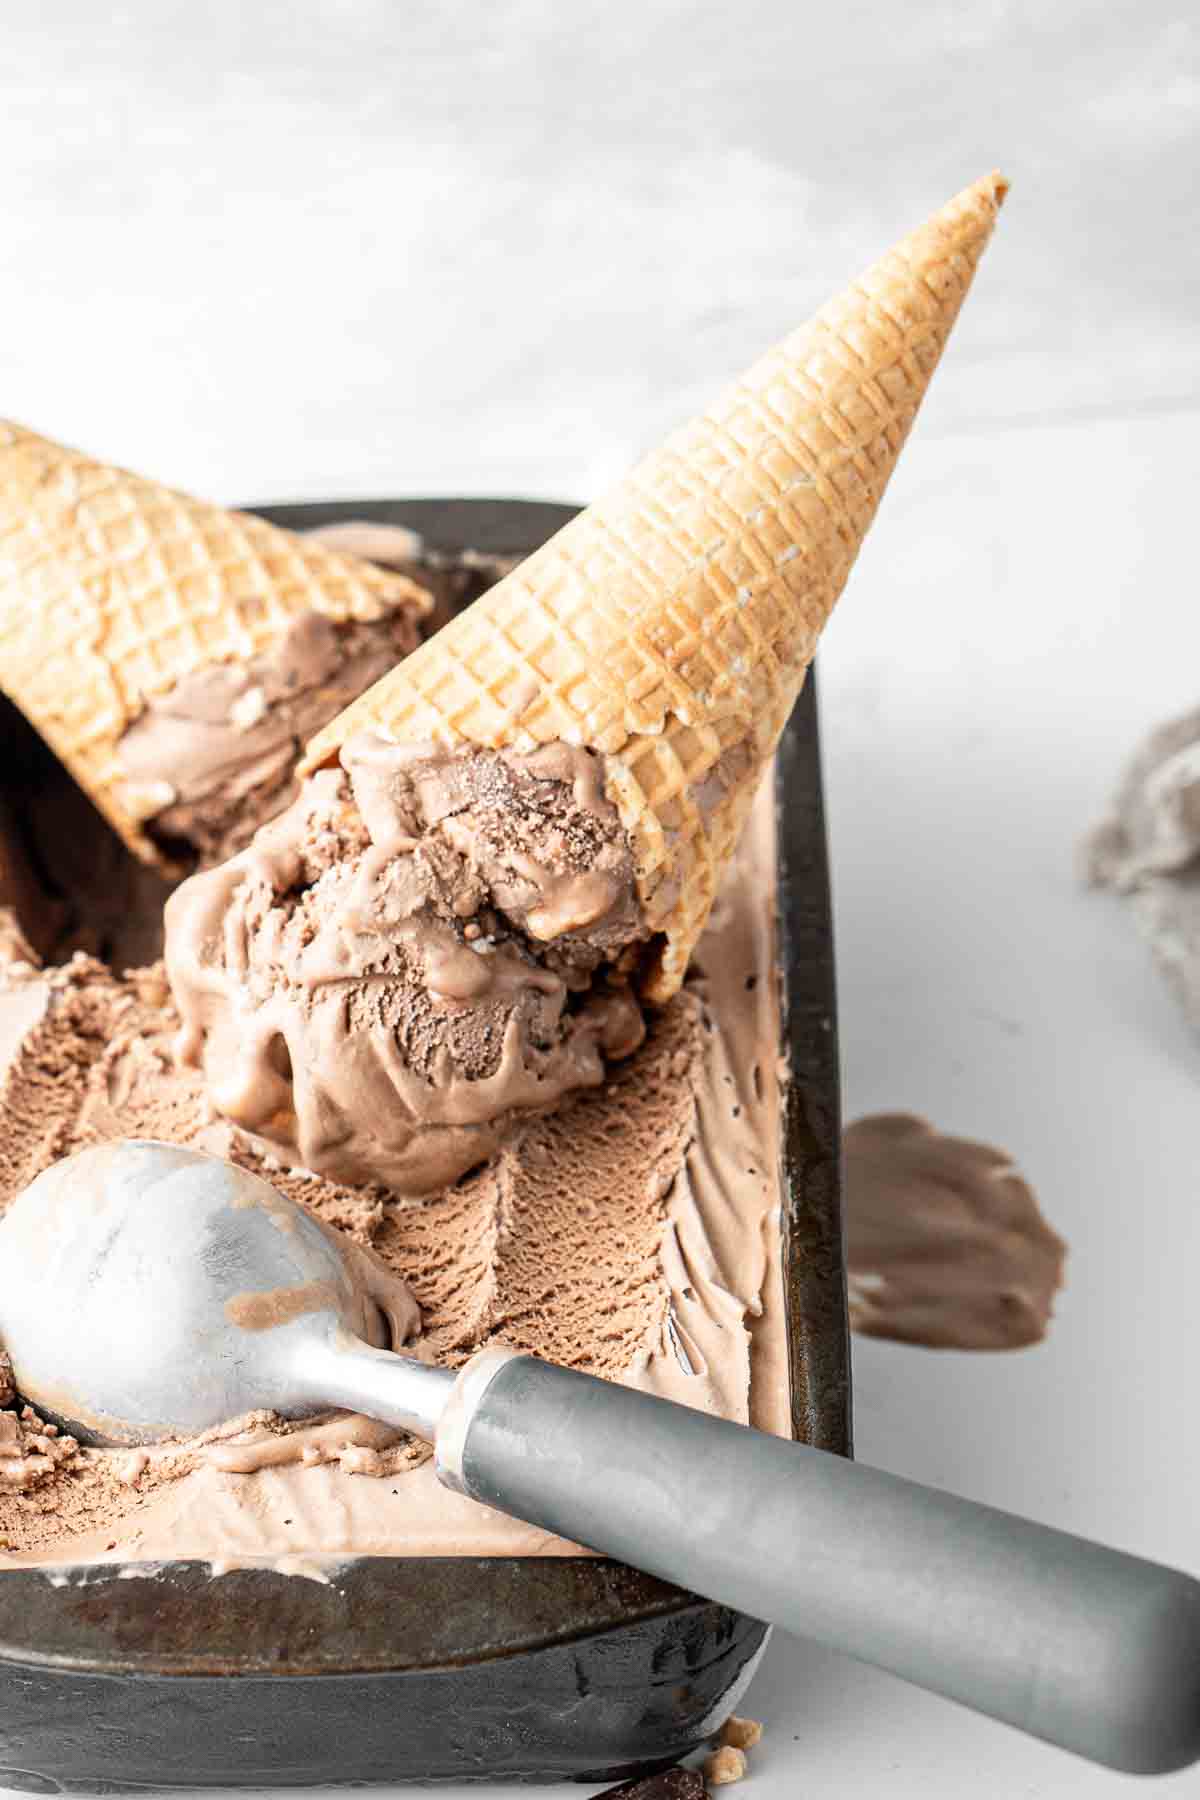 Vegan rocky road ice cream in a waffle cone upside down in the ice cream container. 